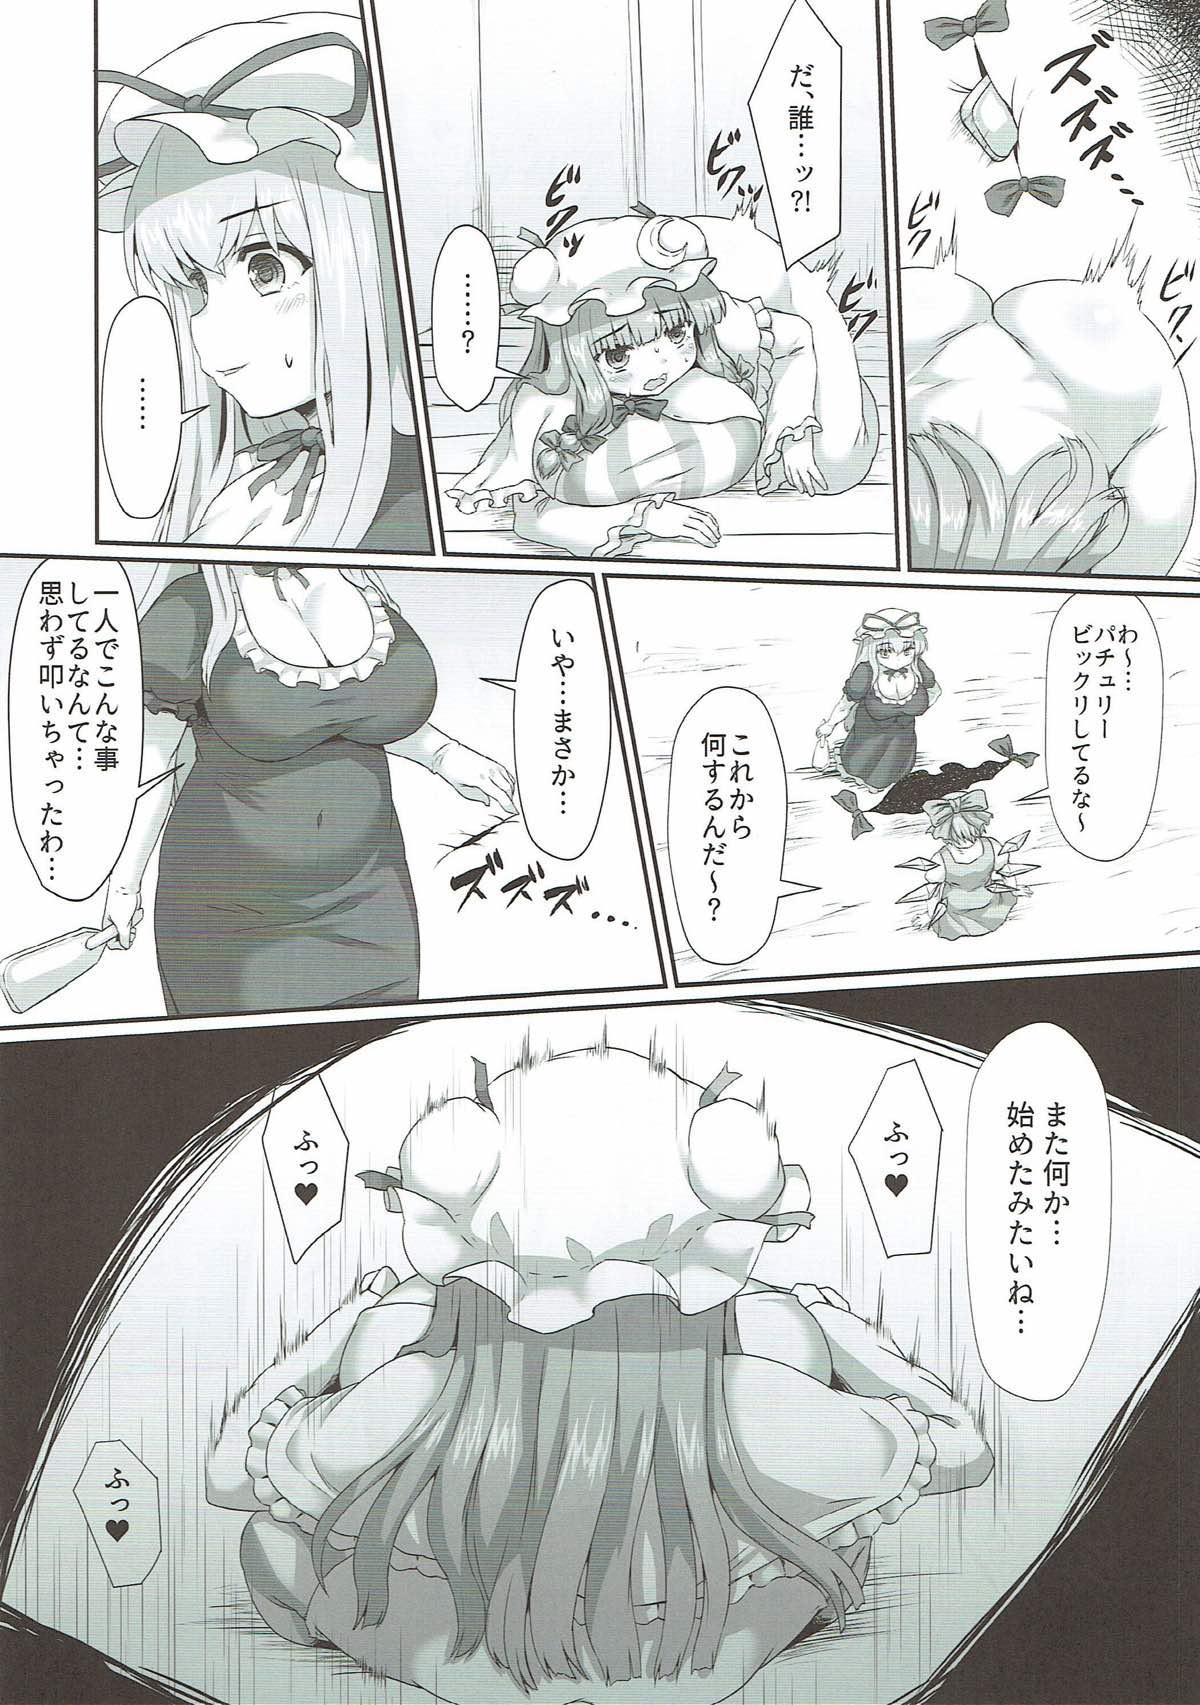 Webcamchat パチュリーの尻穴本 - Touhou project Free Hardcore - Page 5